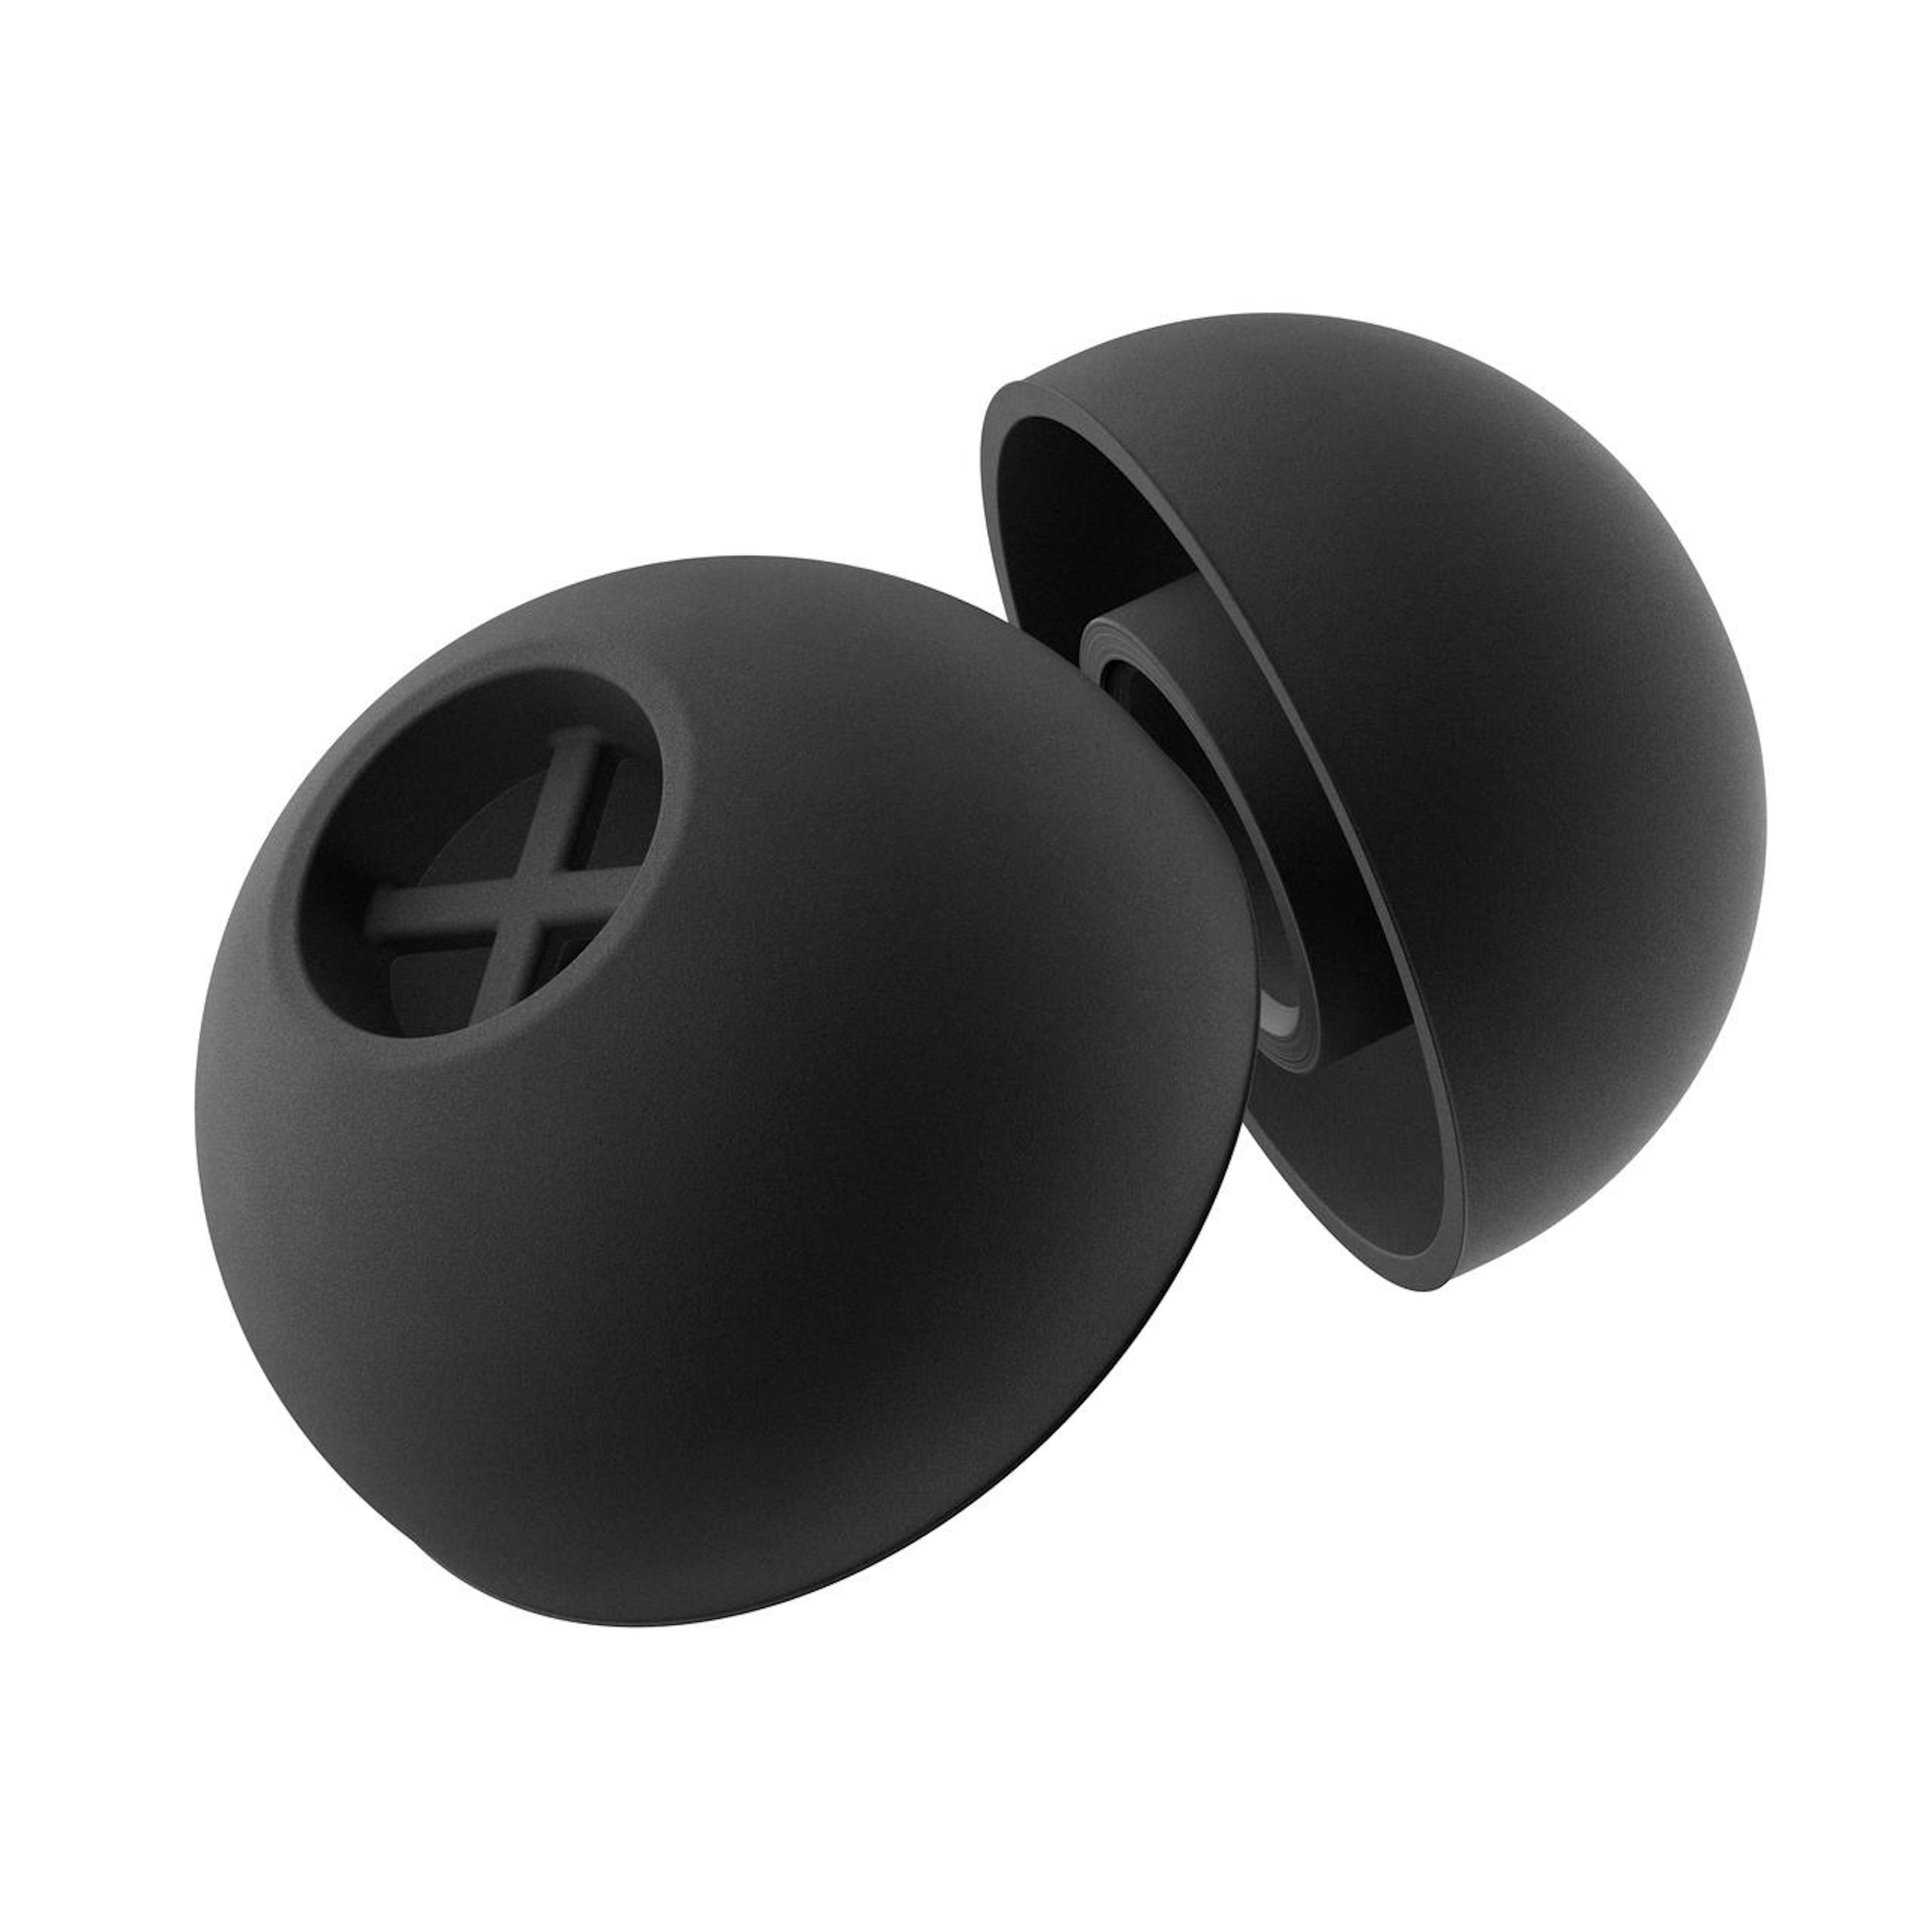 MOMENTUM TW 3 Silicone Ear Adapter, black, 5 pair (L)